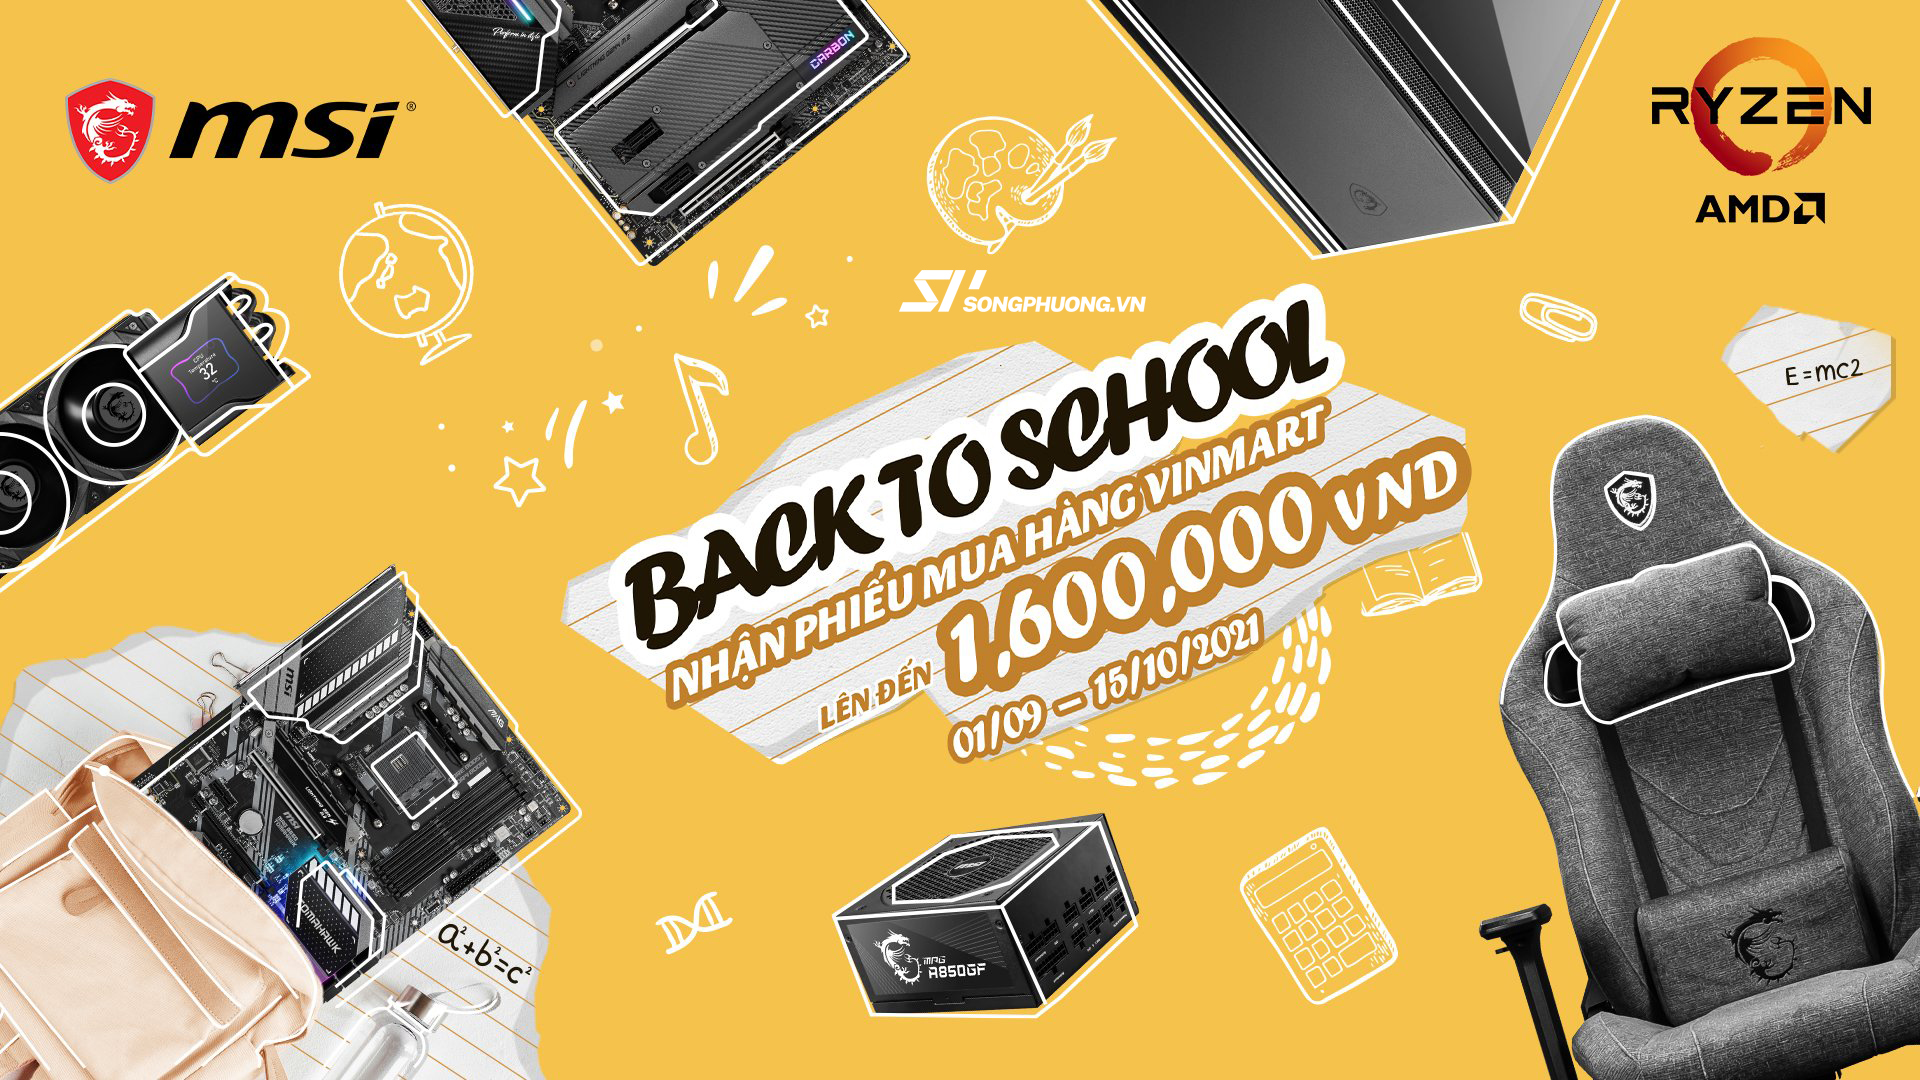 Back to School Online cùng MSI - songphuong.vn